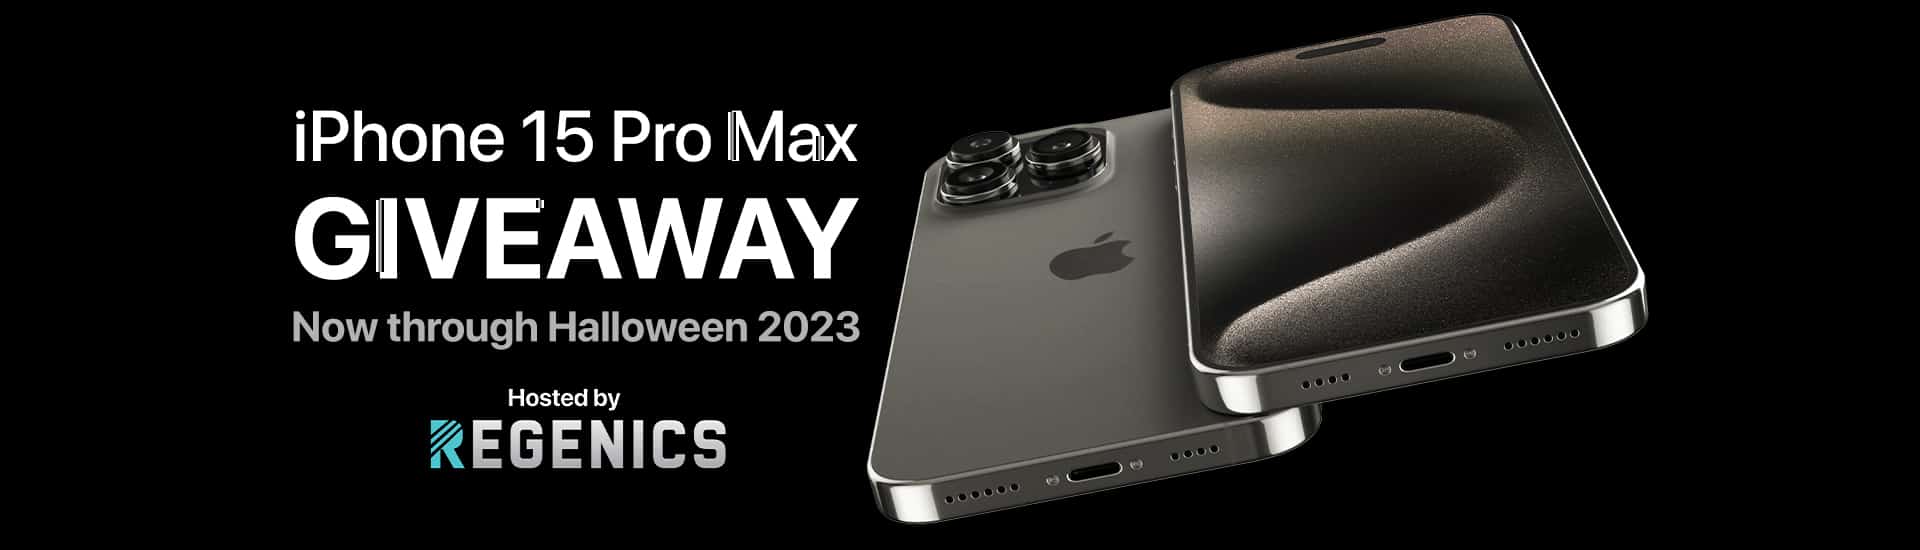 iPhone 5 Pro Max giveaway for Father's Day.